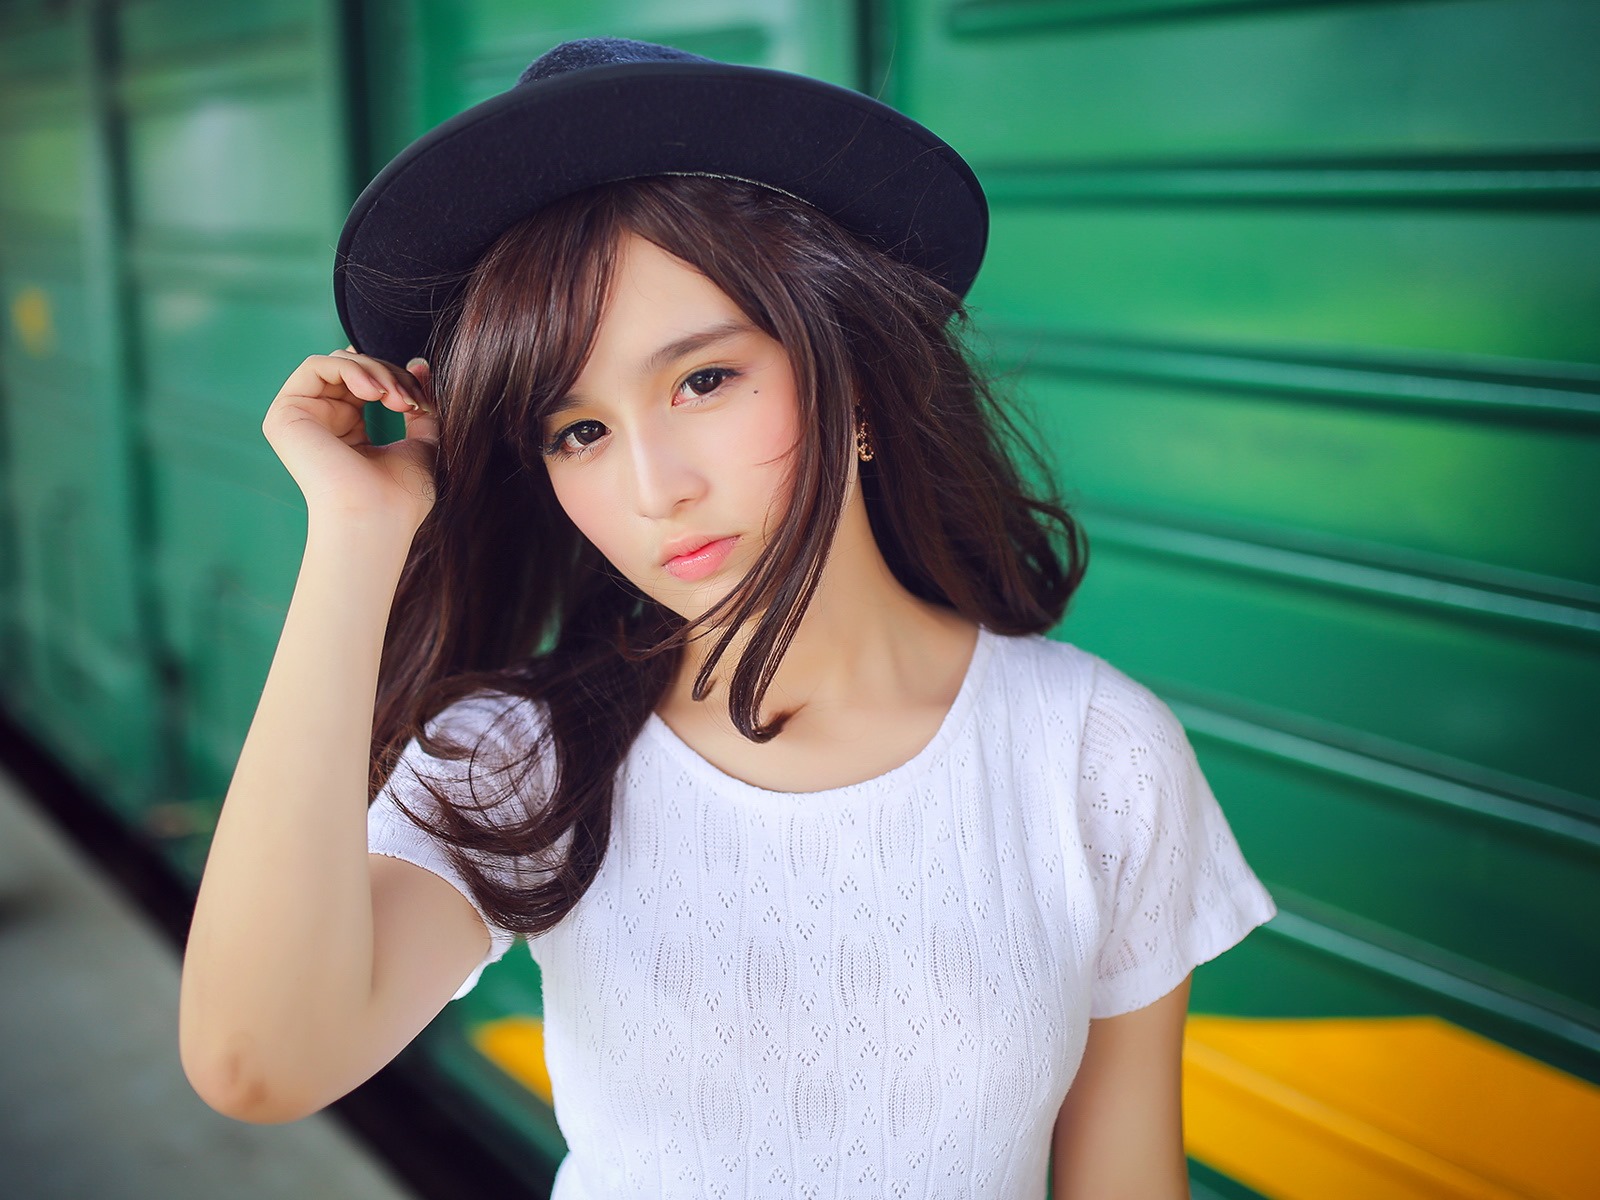 Pure and lovely young Asian girl HD wallpapers collection (2) #1 - 1600x1200